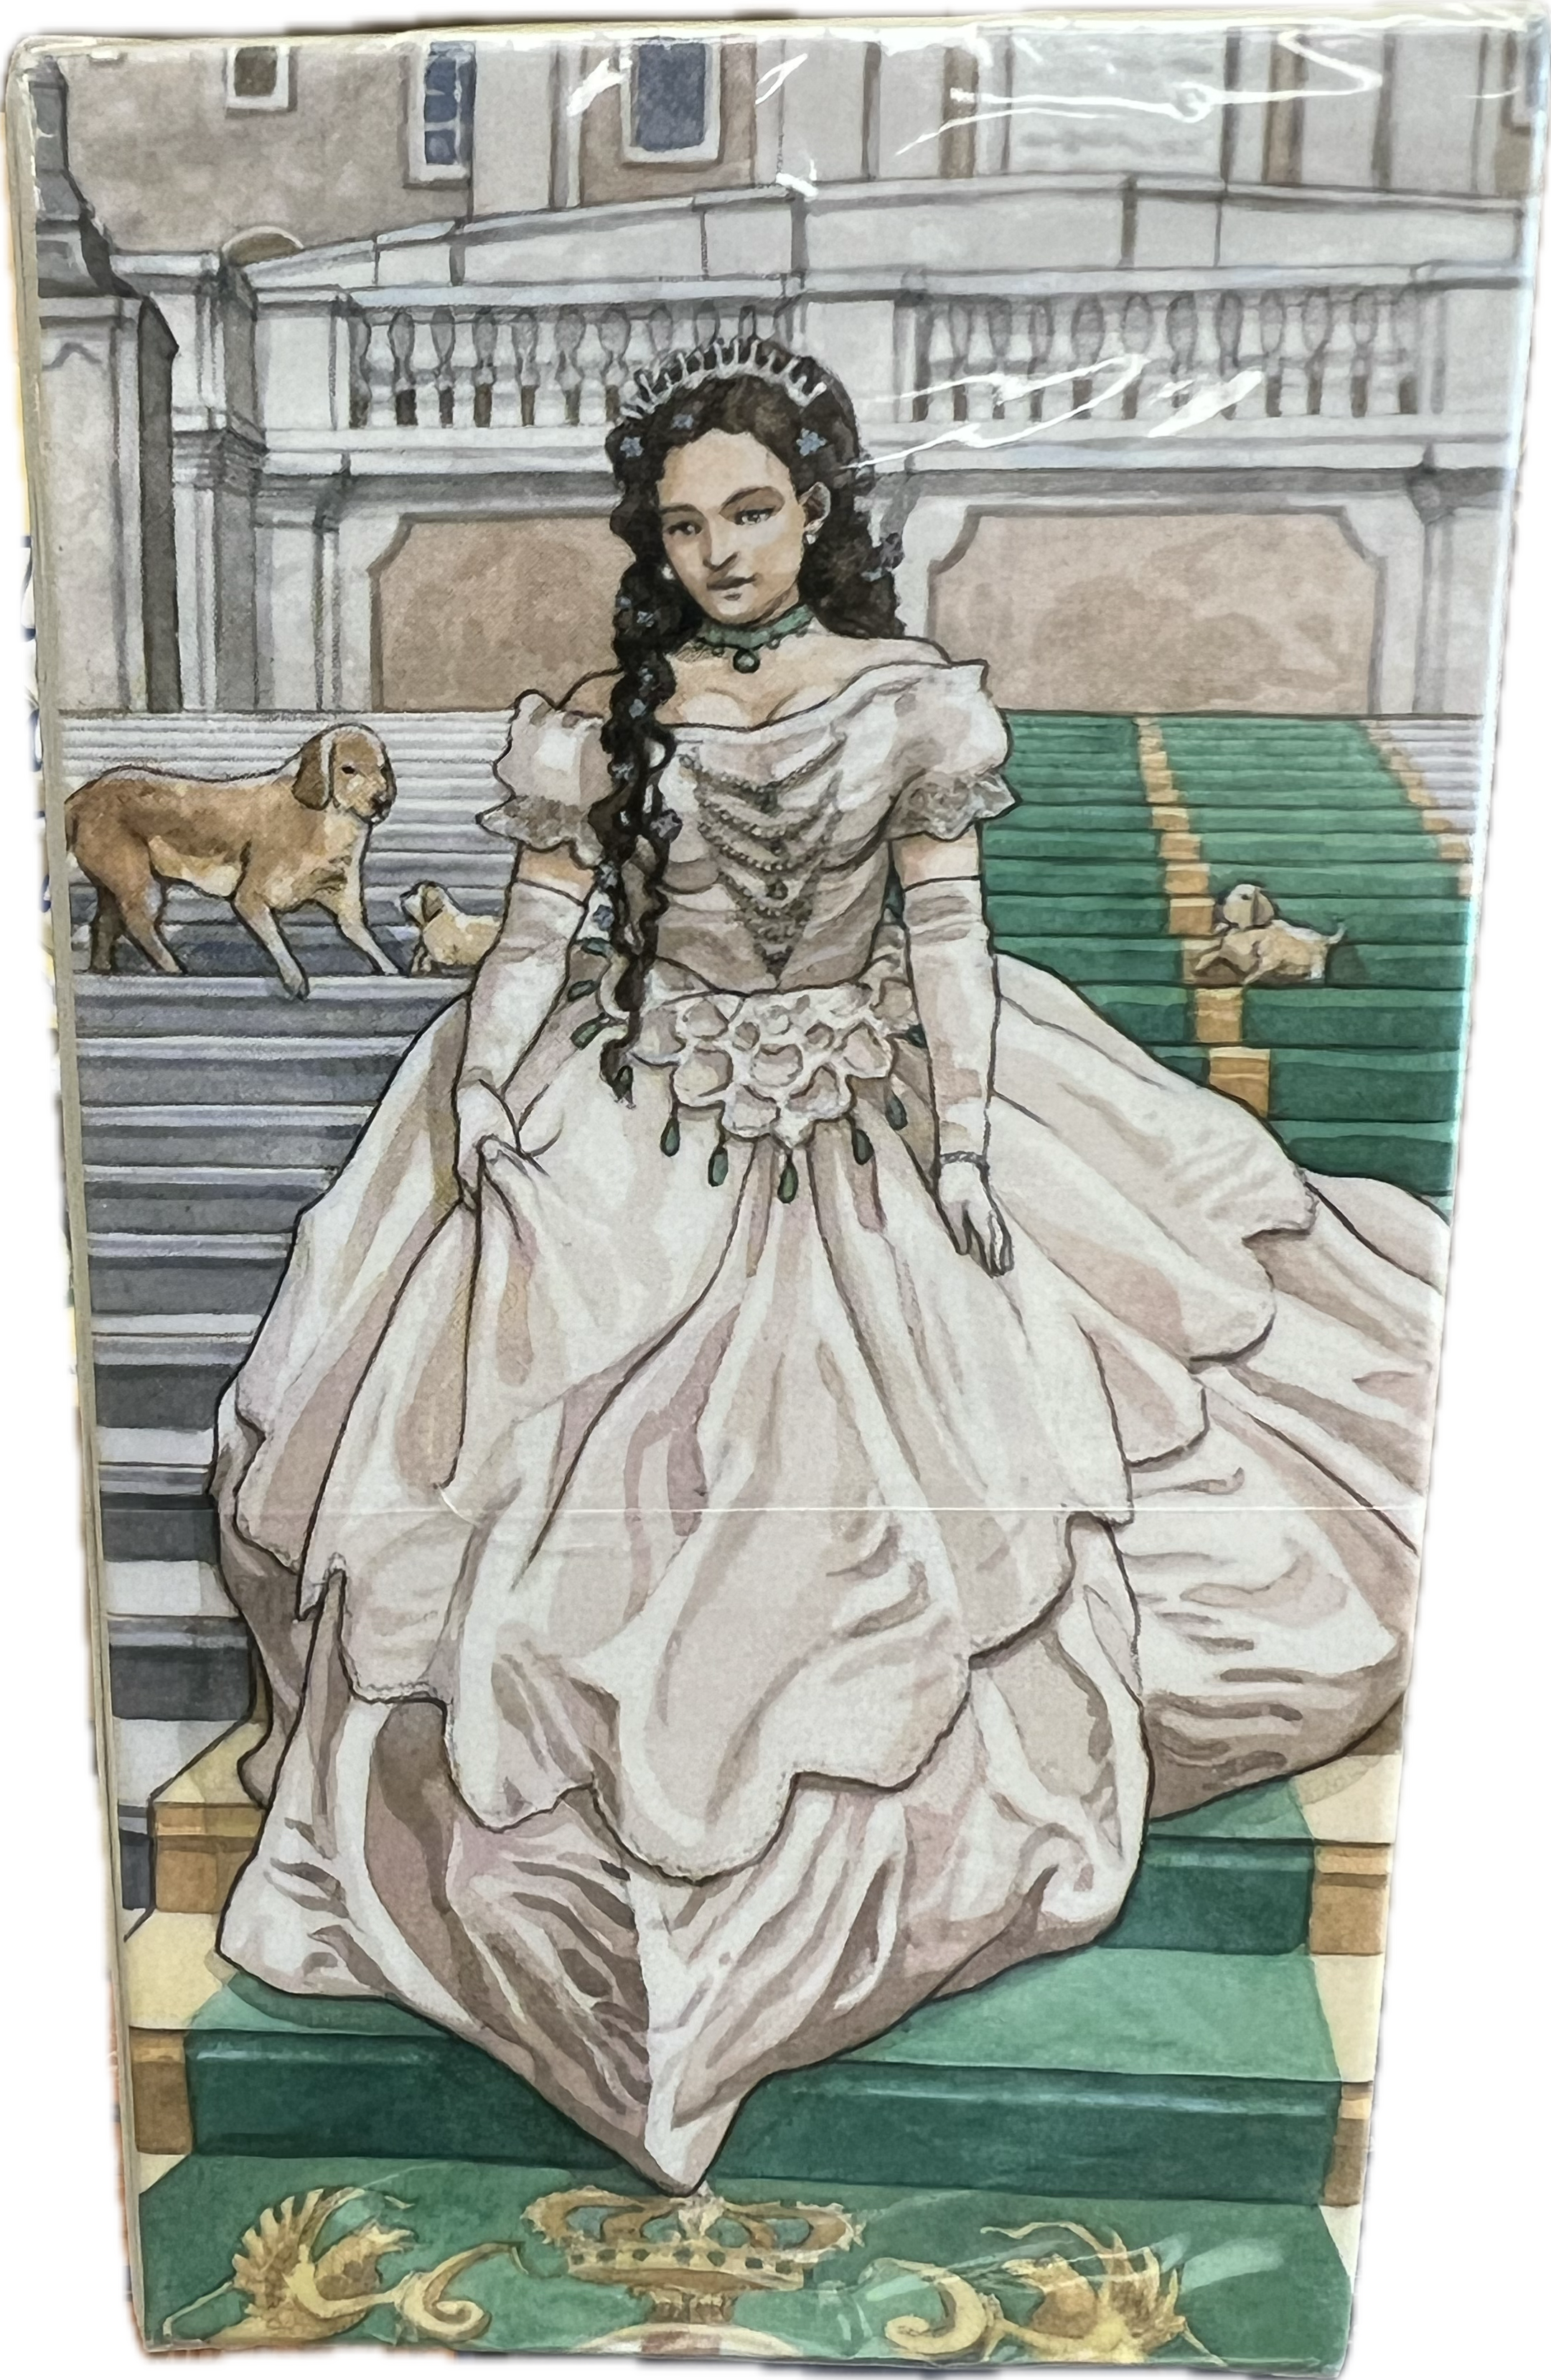 Full image of woman in victorian dress walking down stairs 